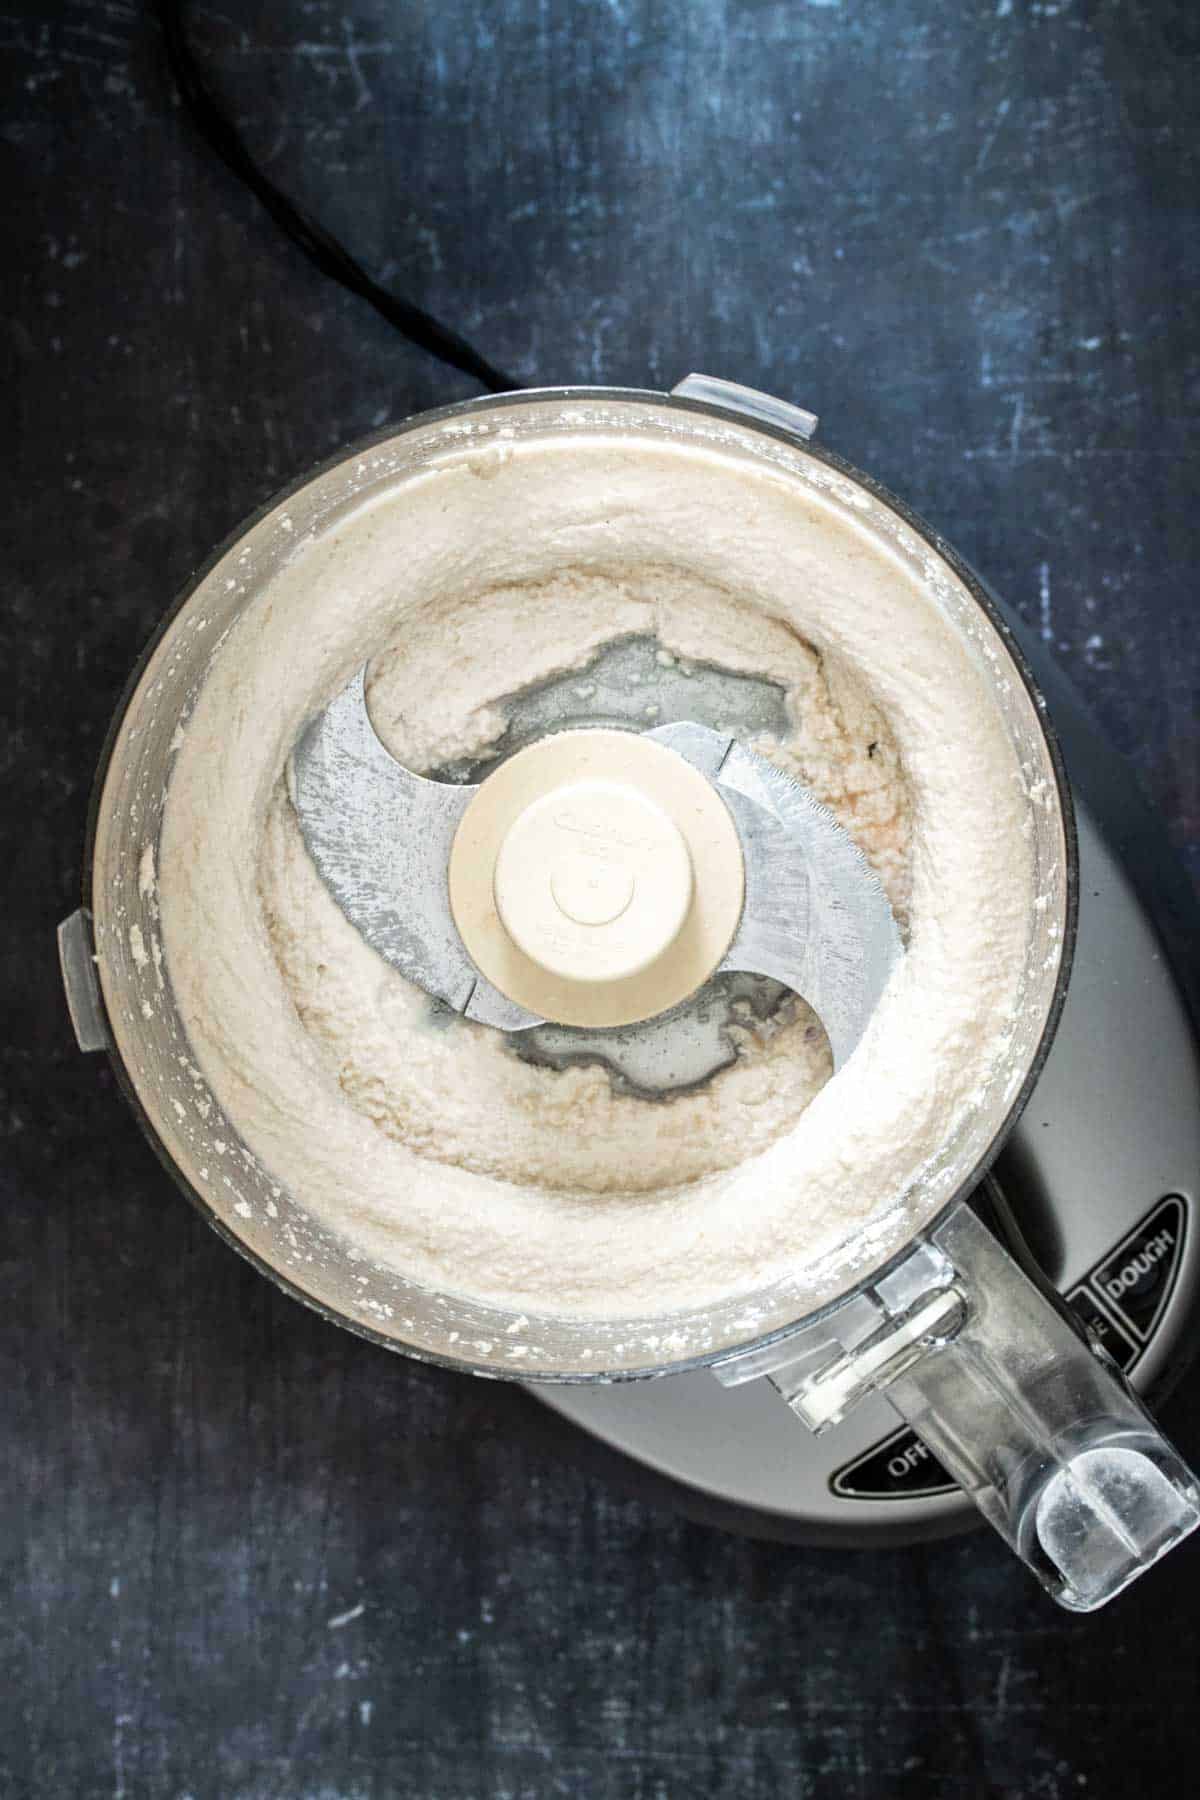 Top view of a food processor sitting on dark surface with a creamy mixture inside